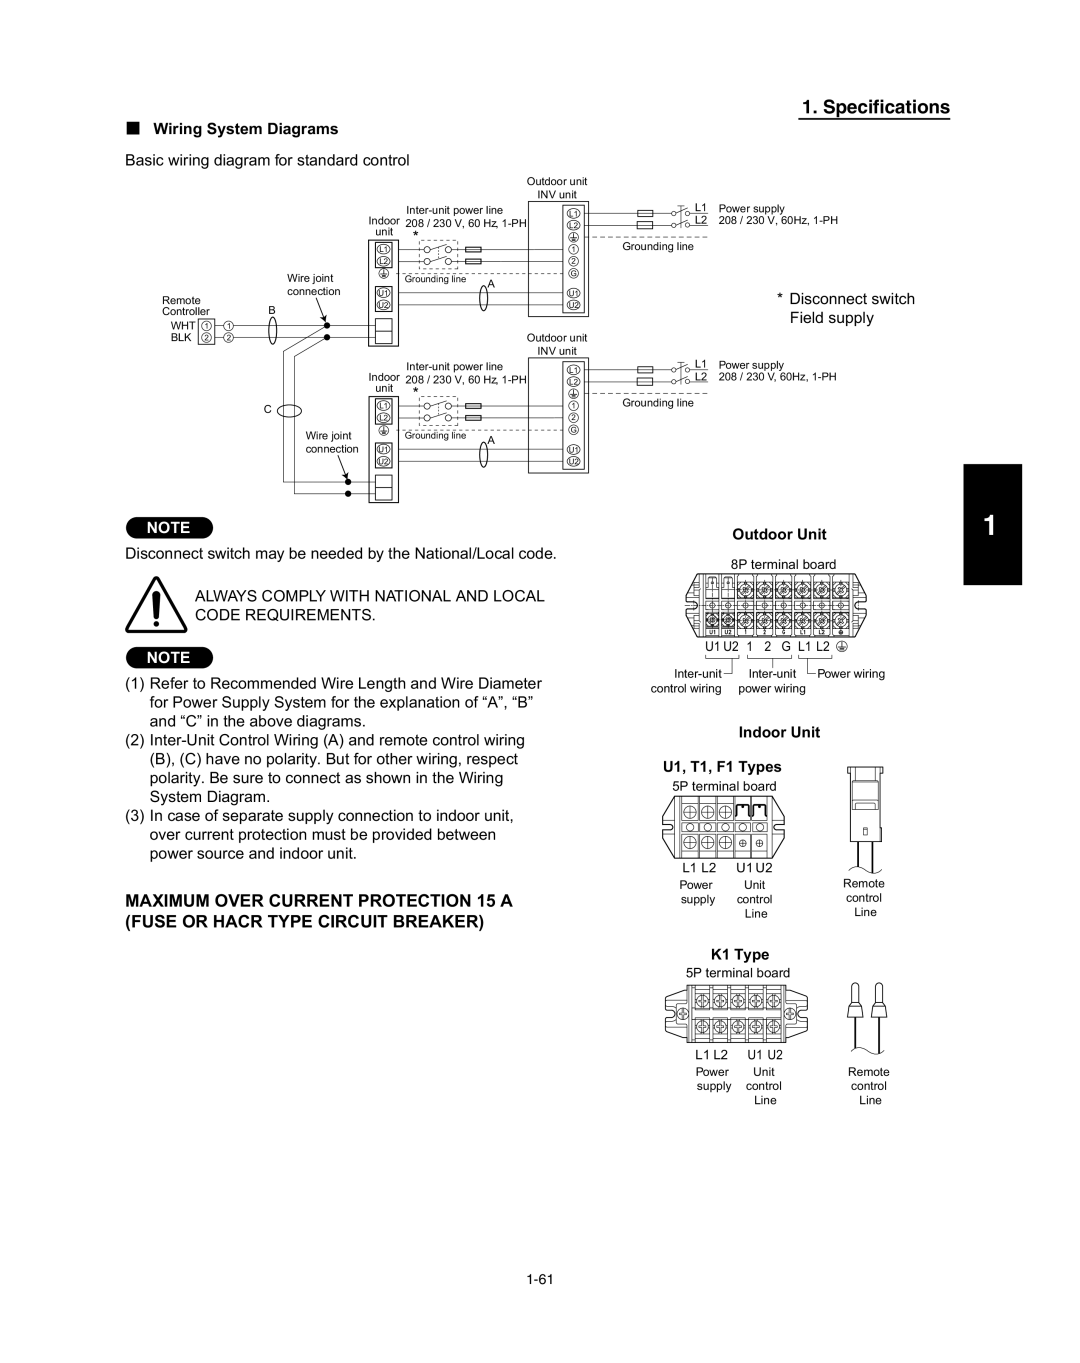 Panasonic R410A service manual Specifications, Wiring System Diagrams, Outdoor Unit, Indoor Unit U1, T1, F1 Types, K1 Type 